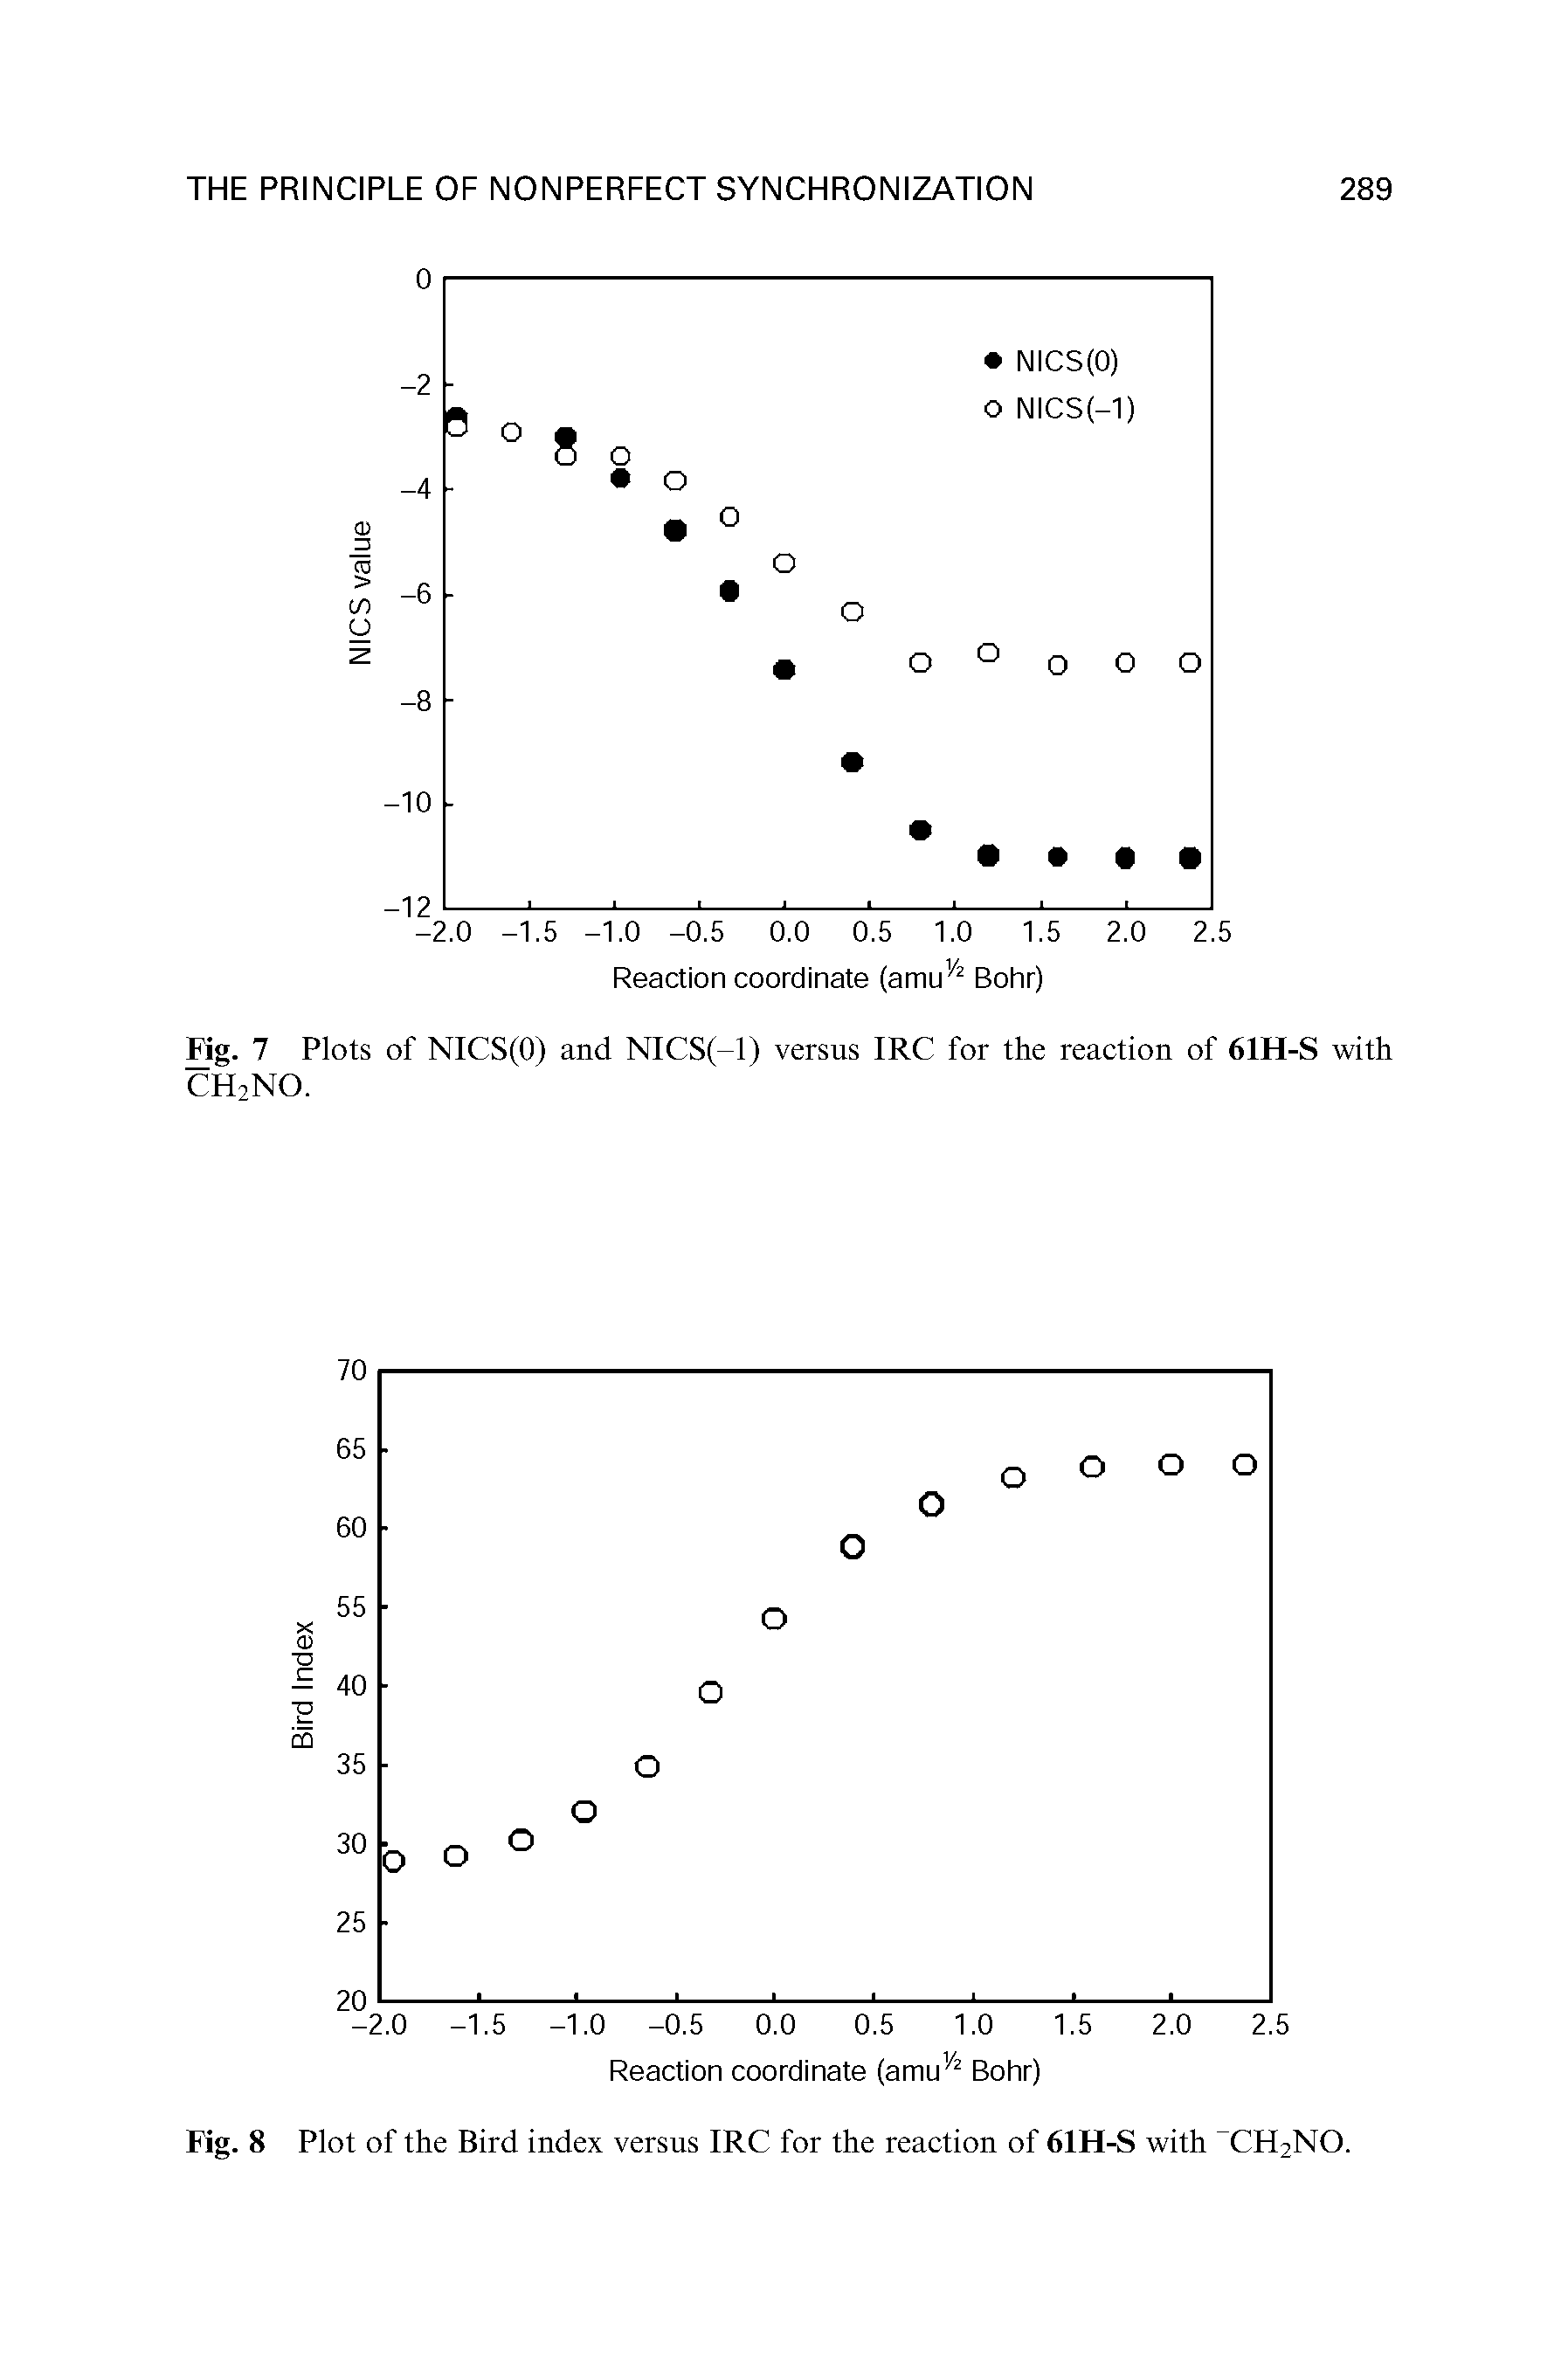 Fig. 8 Plot of the Bird index versus IRC for the reaction of 61FI-S with CH2NO.